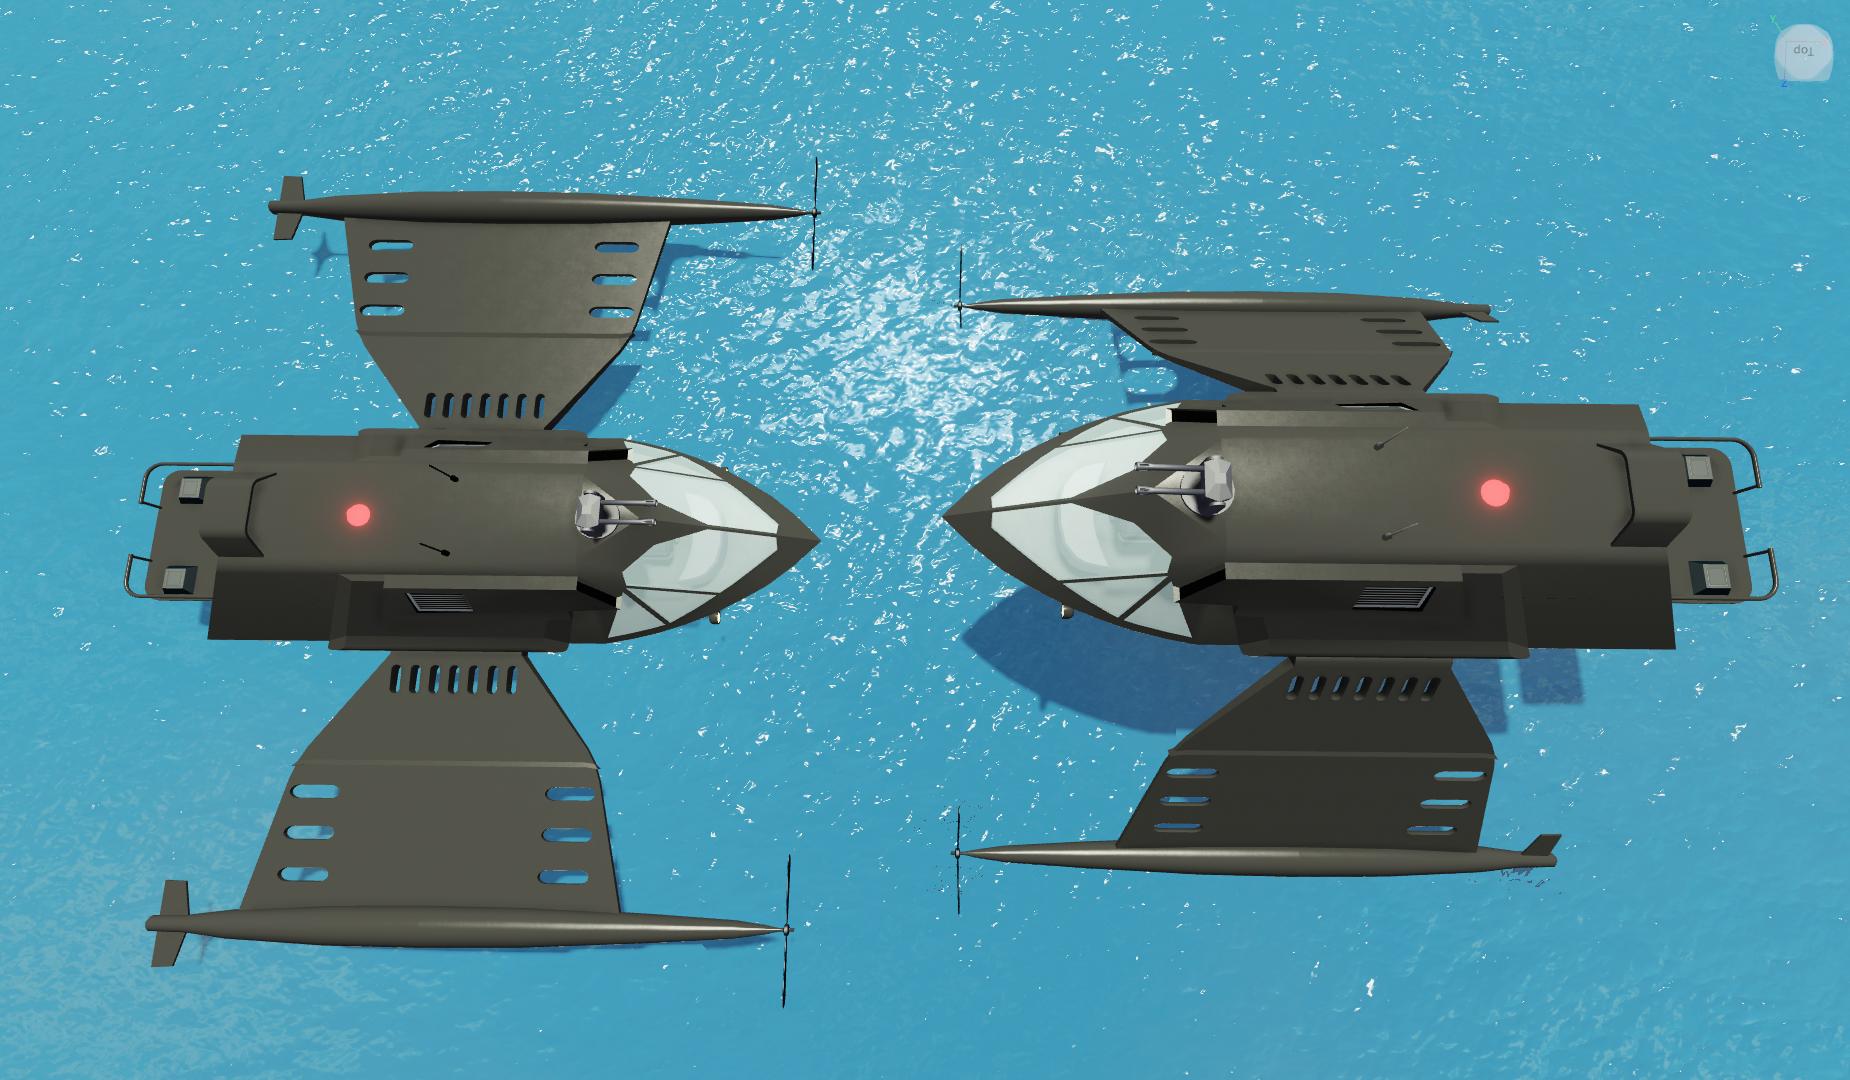 Simon On Twitter Here S A Sneak Peak Of The New Stealth Boat Stealth Can Both Sail On Water Using Its Extendable Hydrofoil Wings And Can Also Dive As A Submarine Stealth Has - i bought the new stealth boat in roblox sharkbite youtube